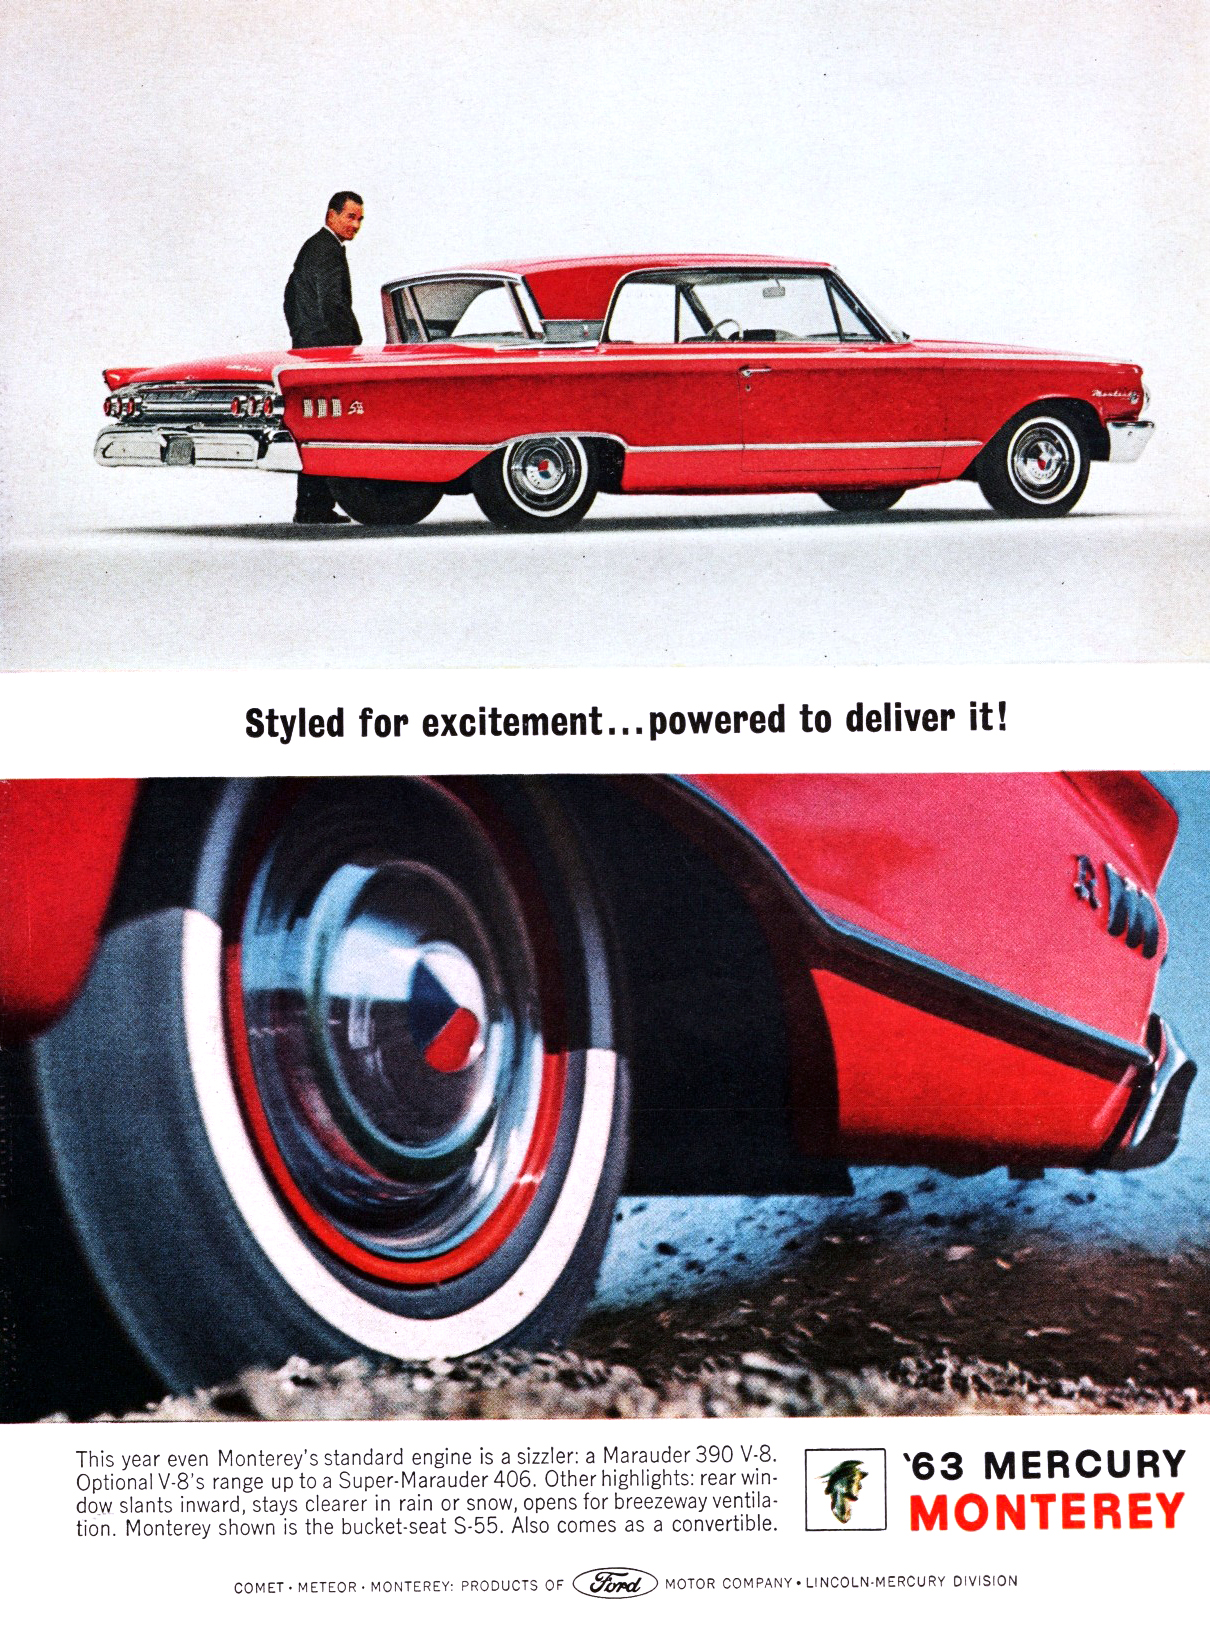 '63 Mercury Monterey Ad (November, 1962 - February, 1963) - Styled for excitement... powered for deliver it!